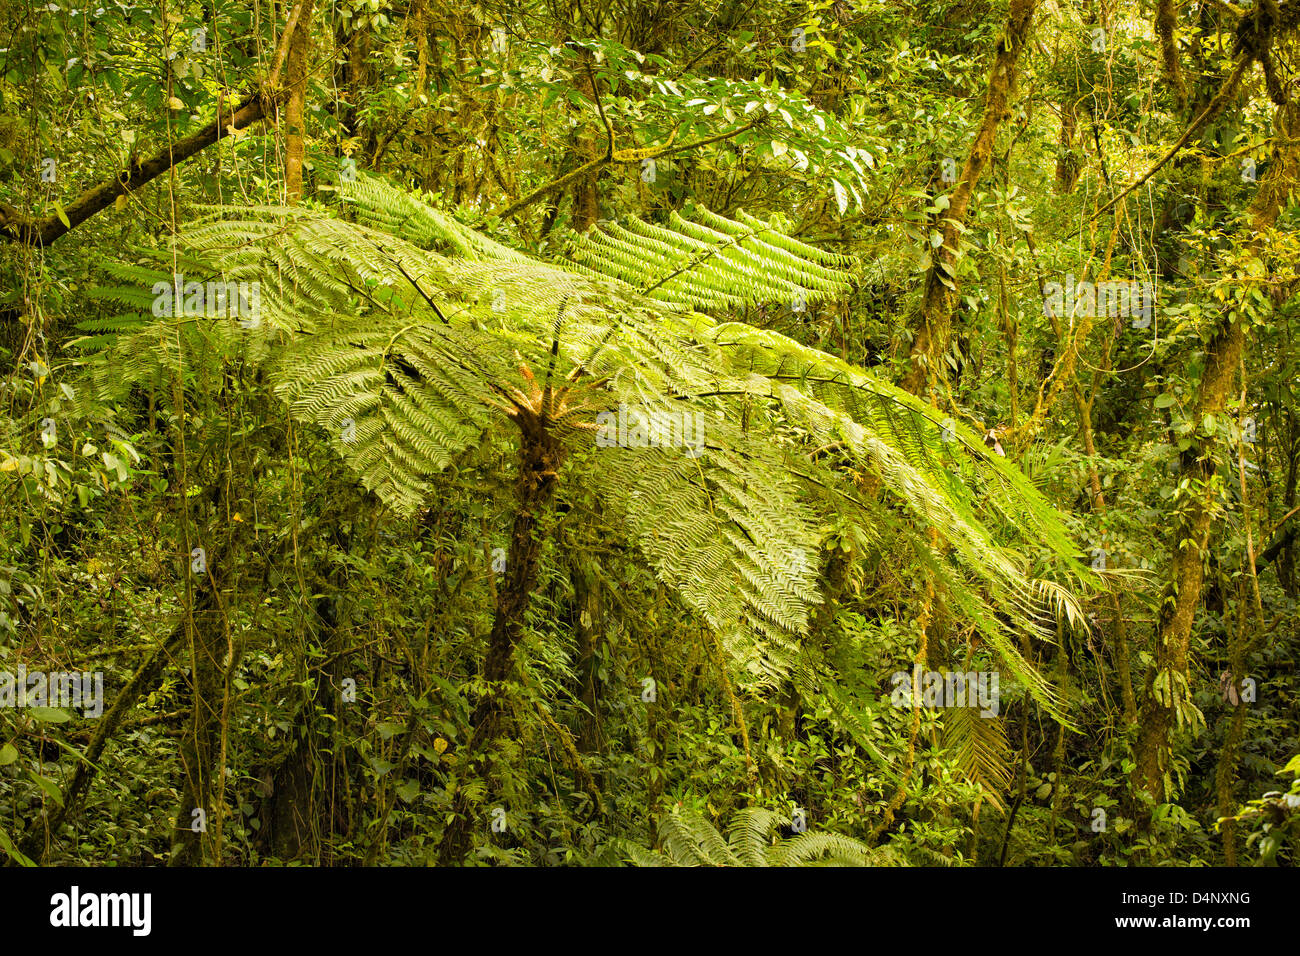 Lush green vegetation with fern tree in Costa Rican rainforest. Stock Photo